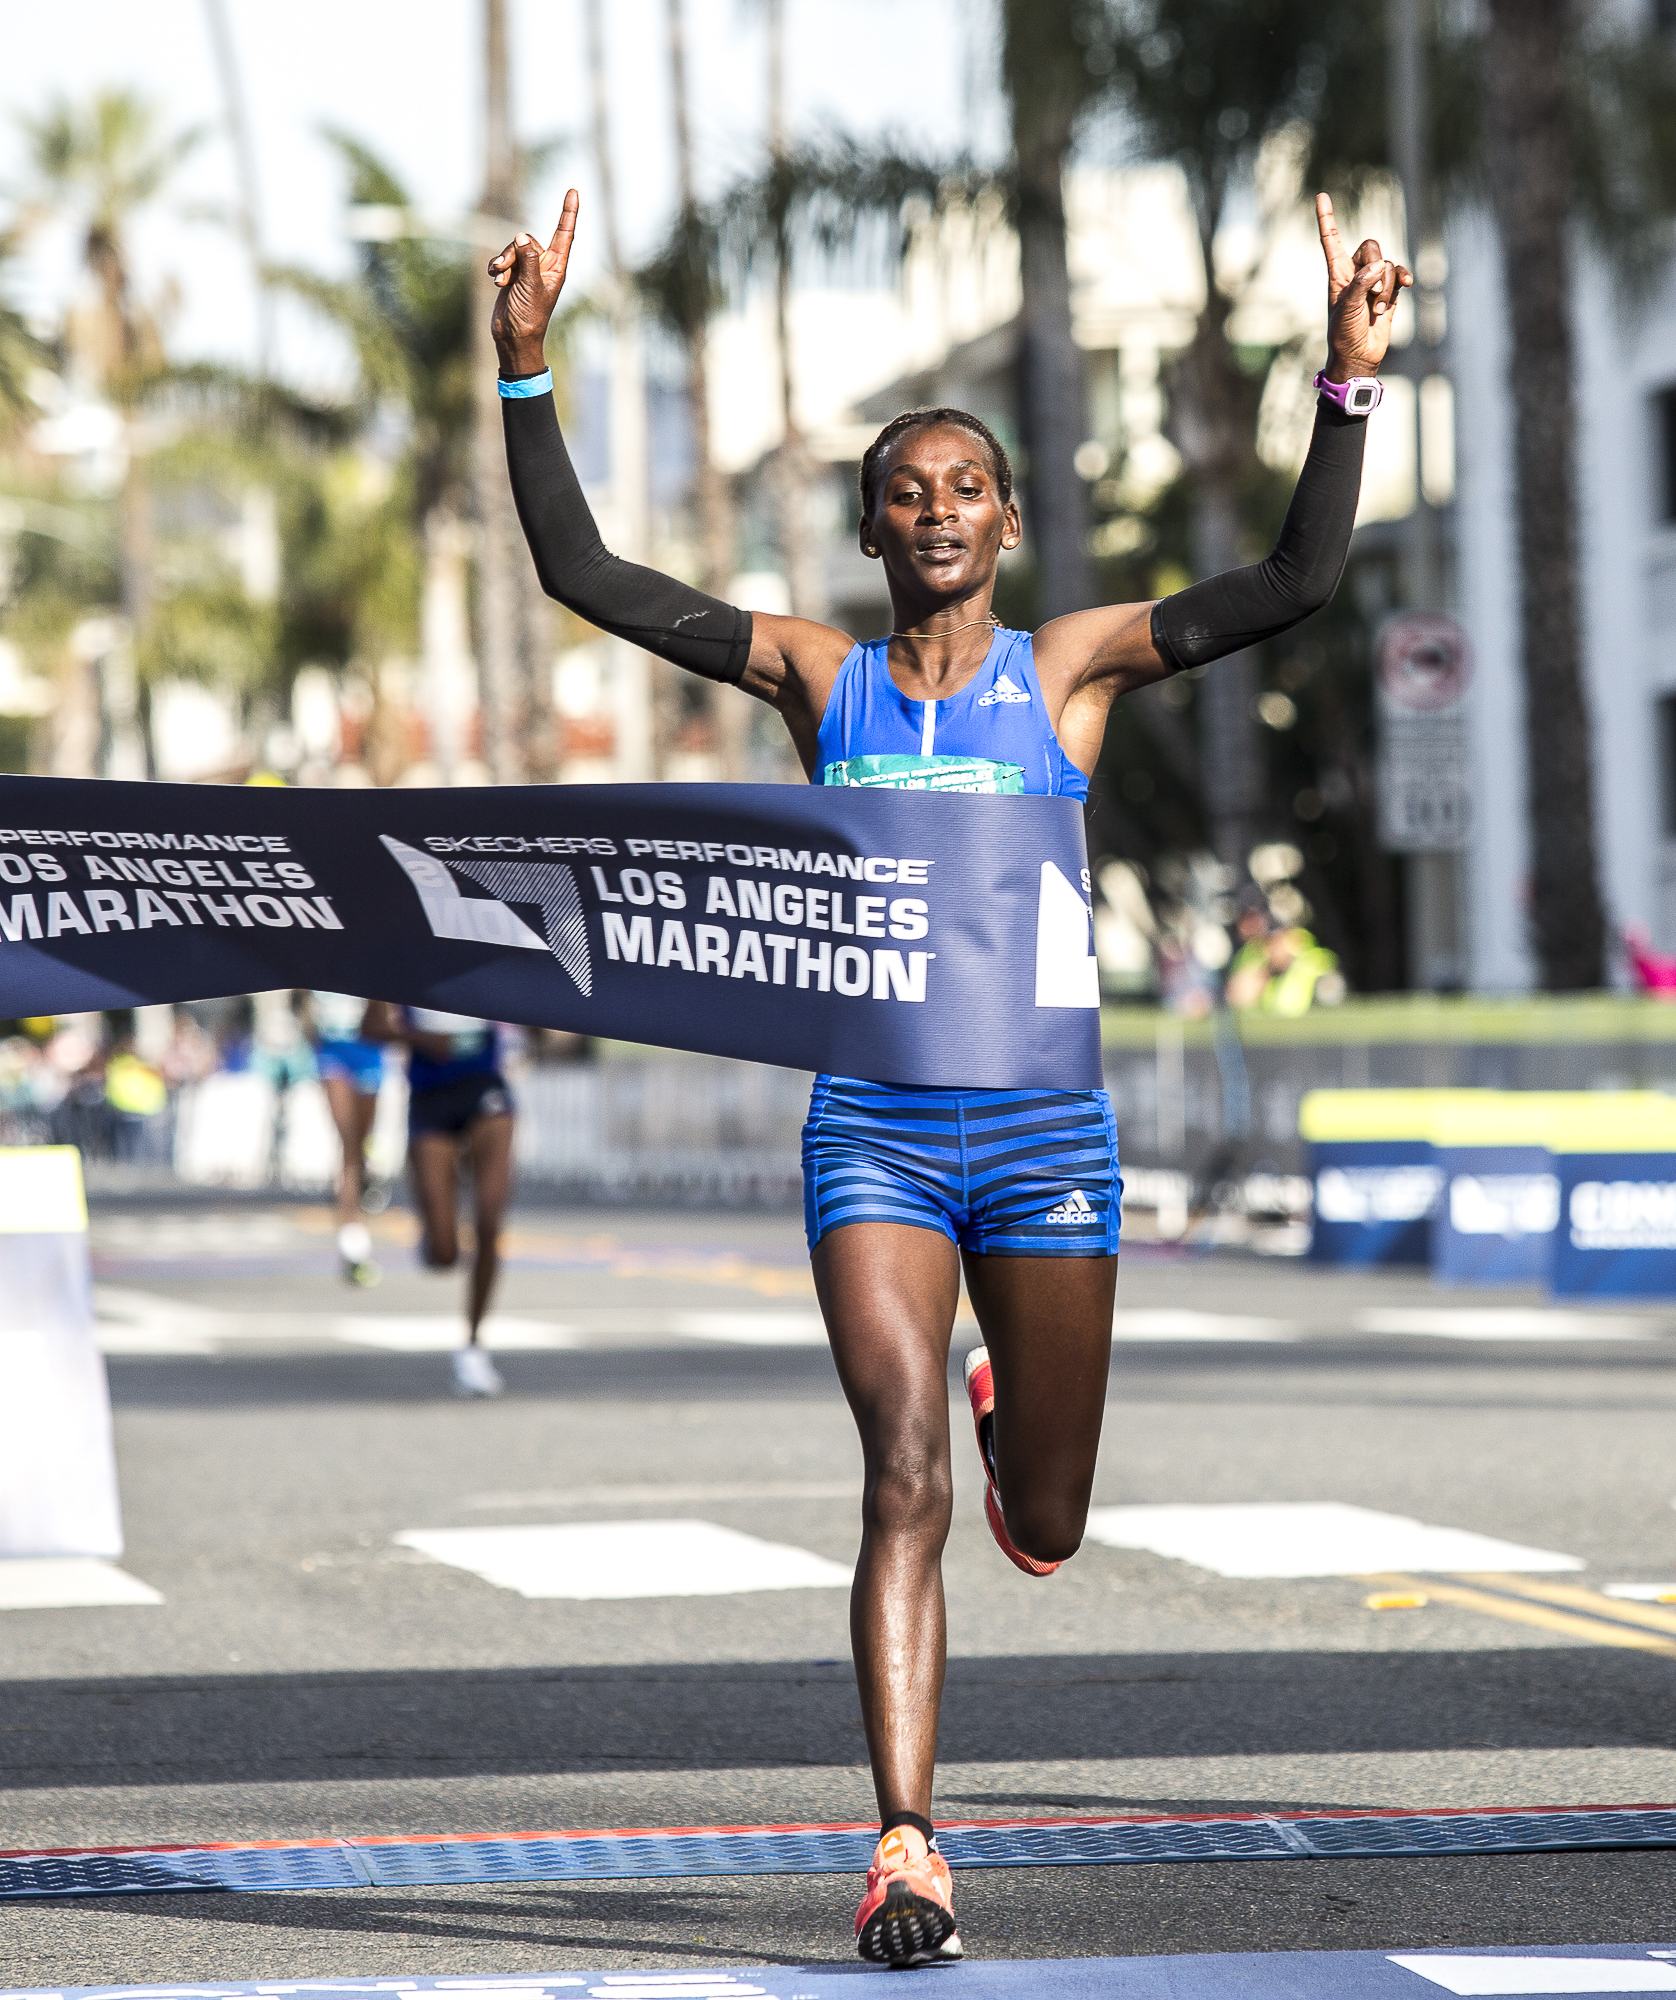  Sule Gedo crosses the finish line, wining the pro-women’s 33rd annual Los Angeles Marathon event with a time of 2:33:50 on March 18, 2018 in Santa Monica, California. (Matthew Martin/Corsair Photo) 